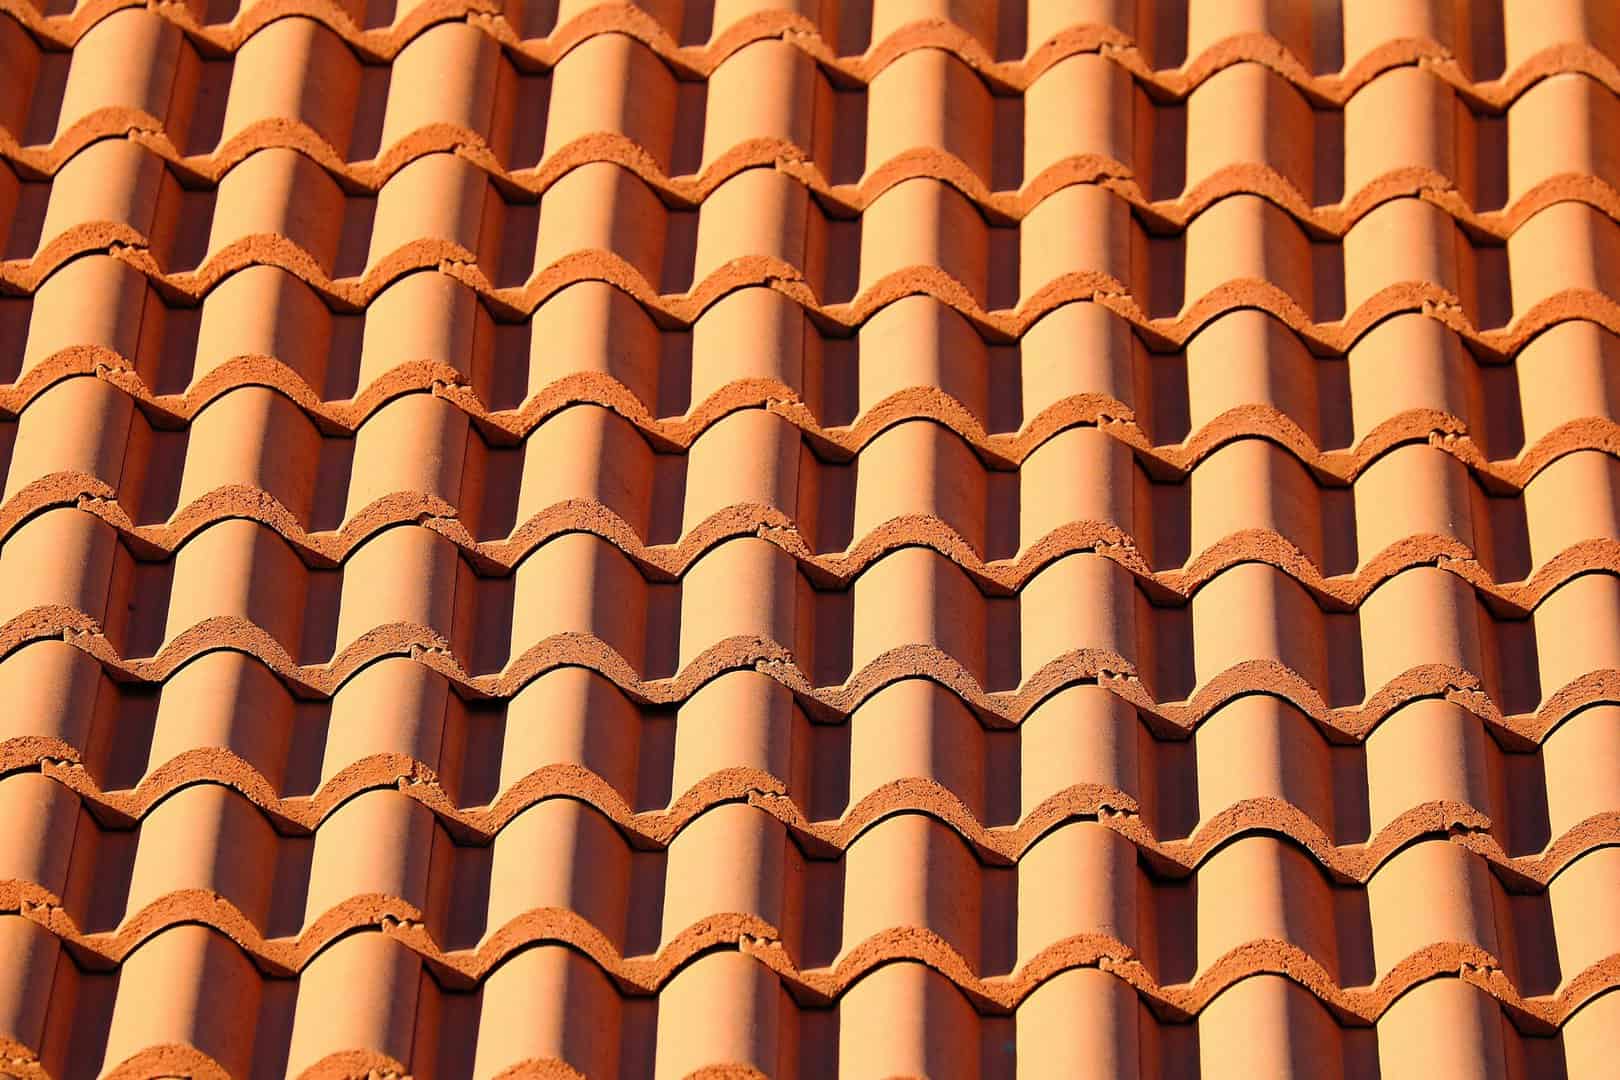 A closeup image of the tile roof of a Minnesota home.